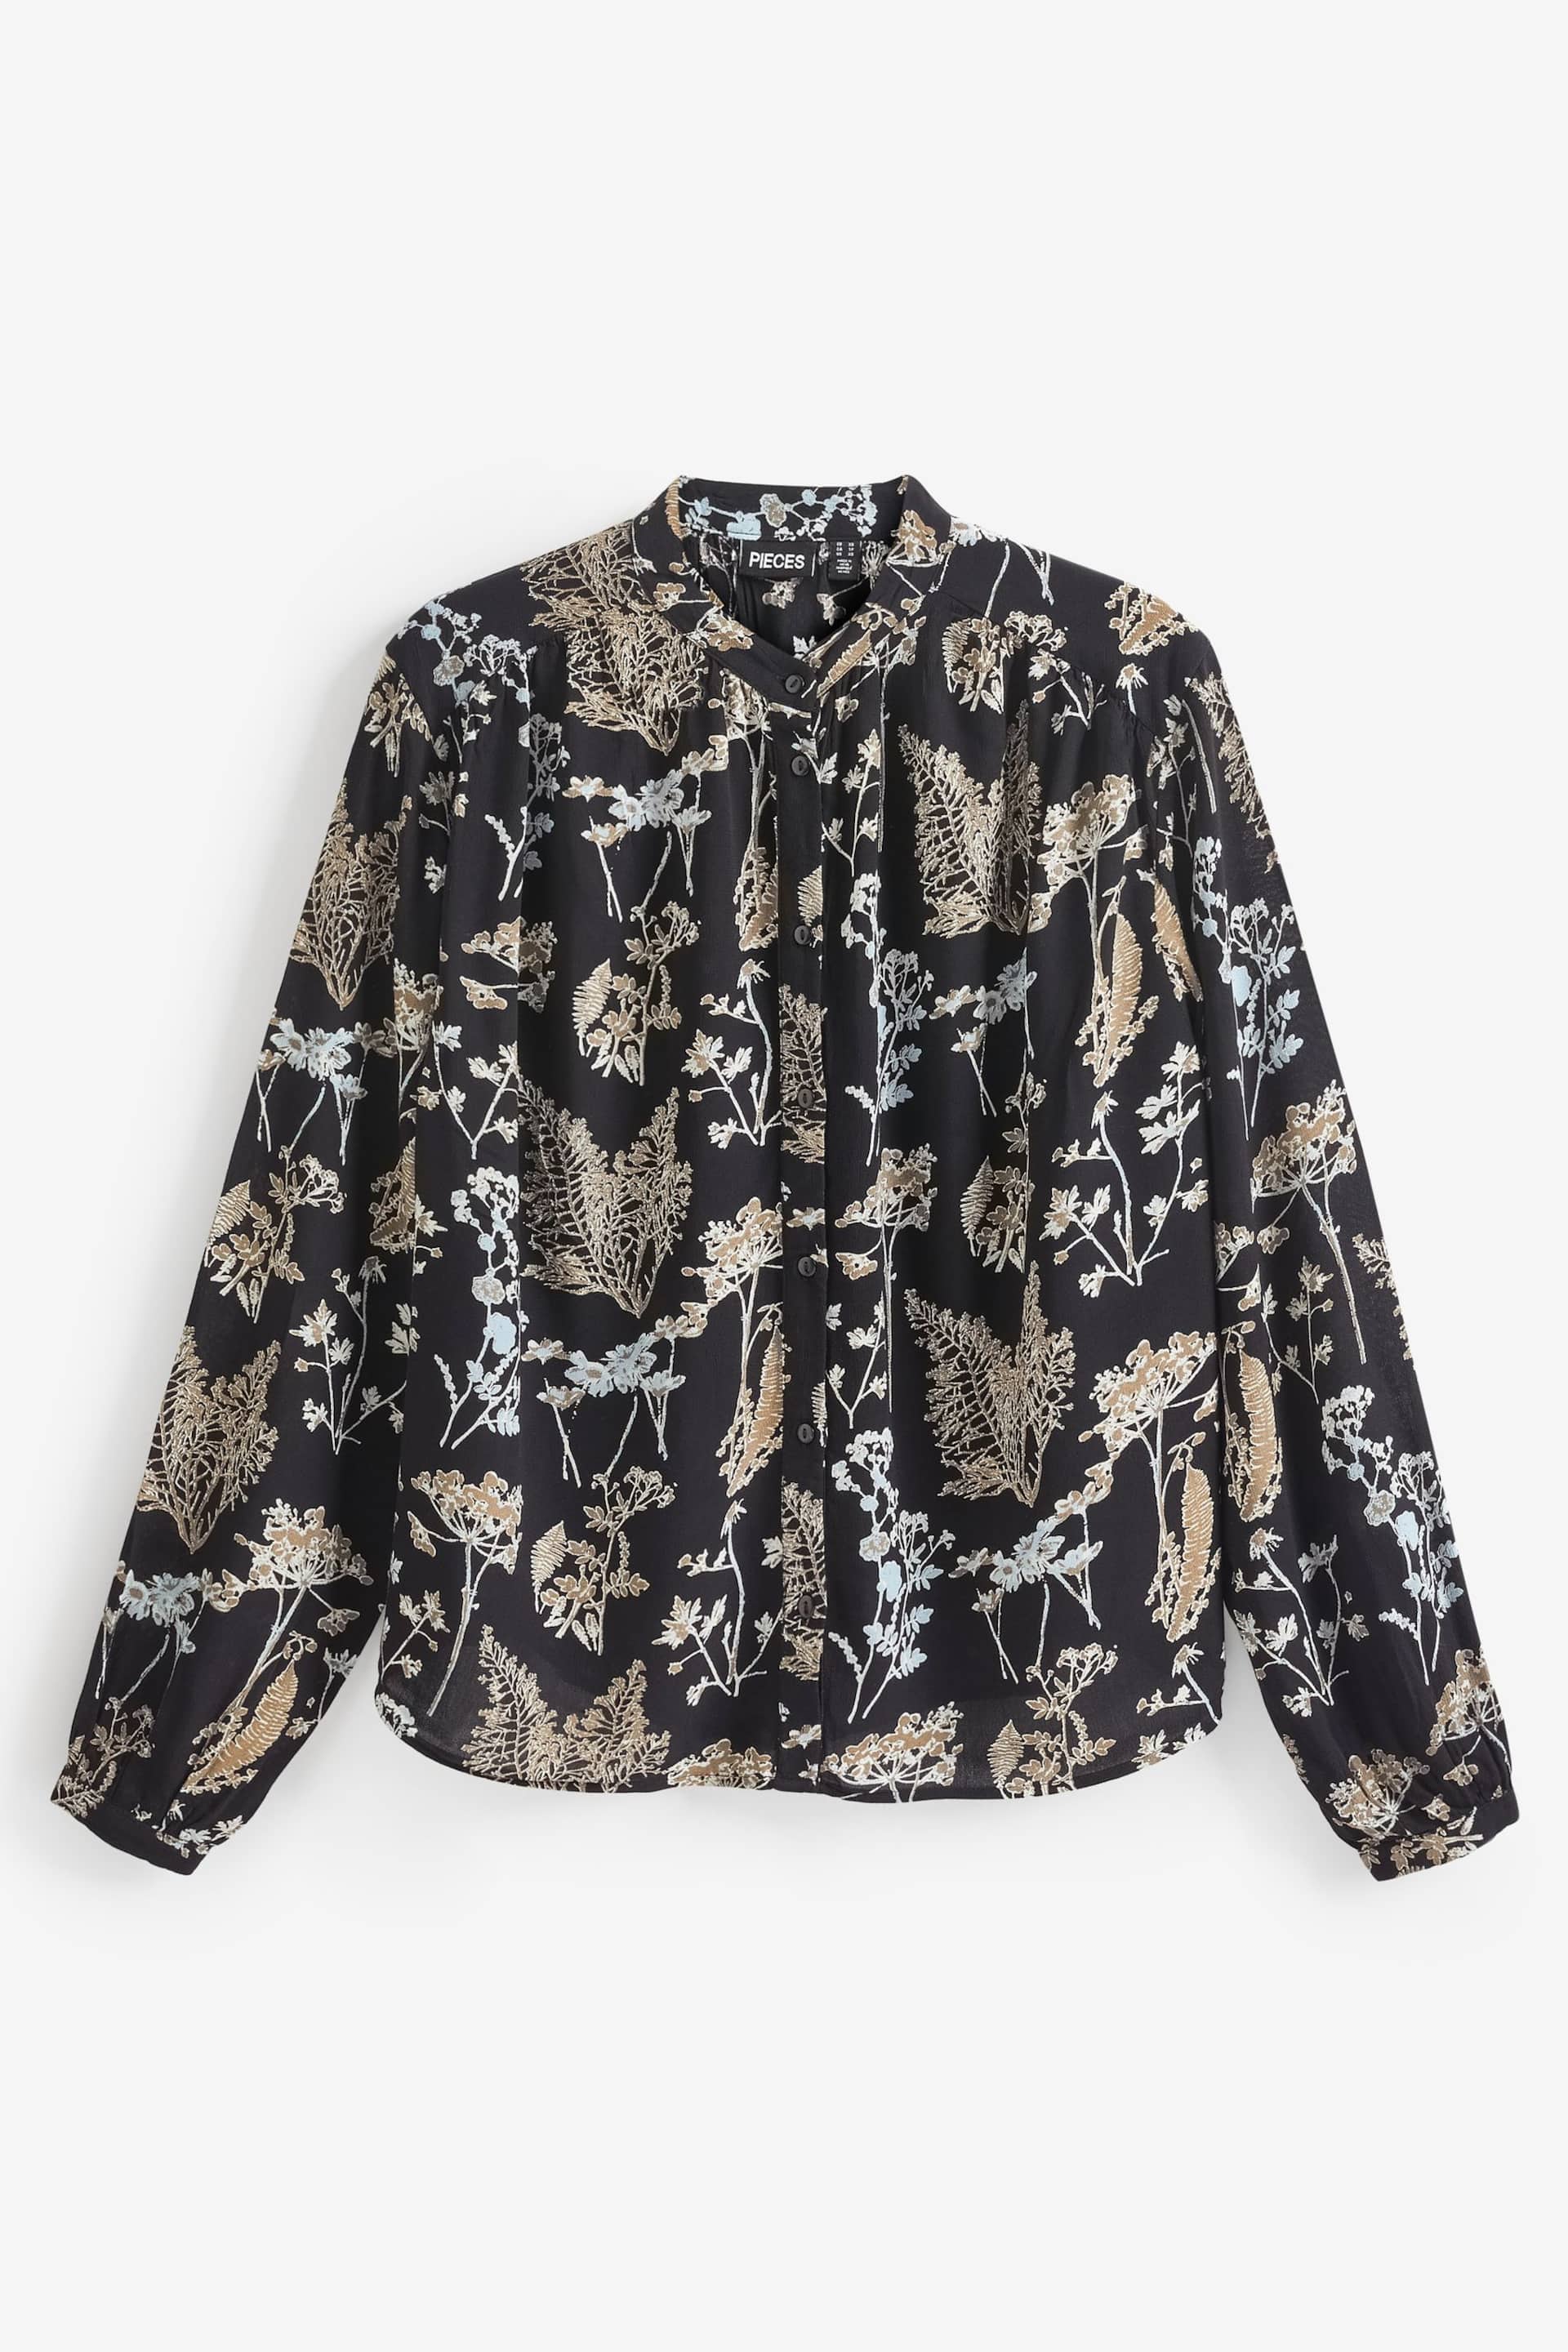 PIECES Black Printed Long Sleeve Blouse - Image 5 of 5